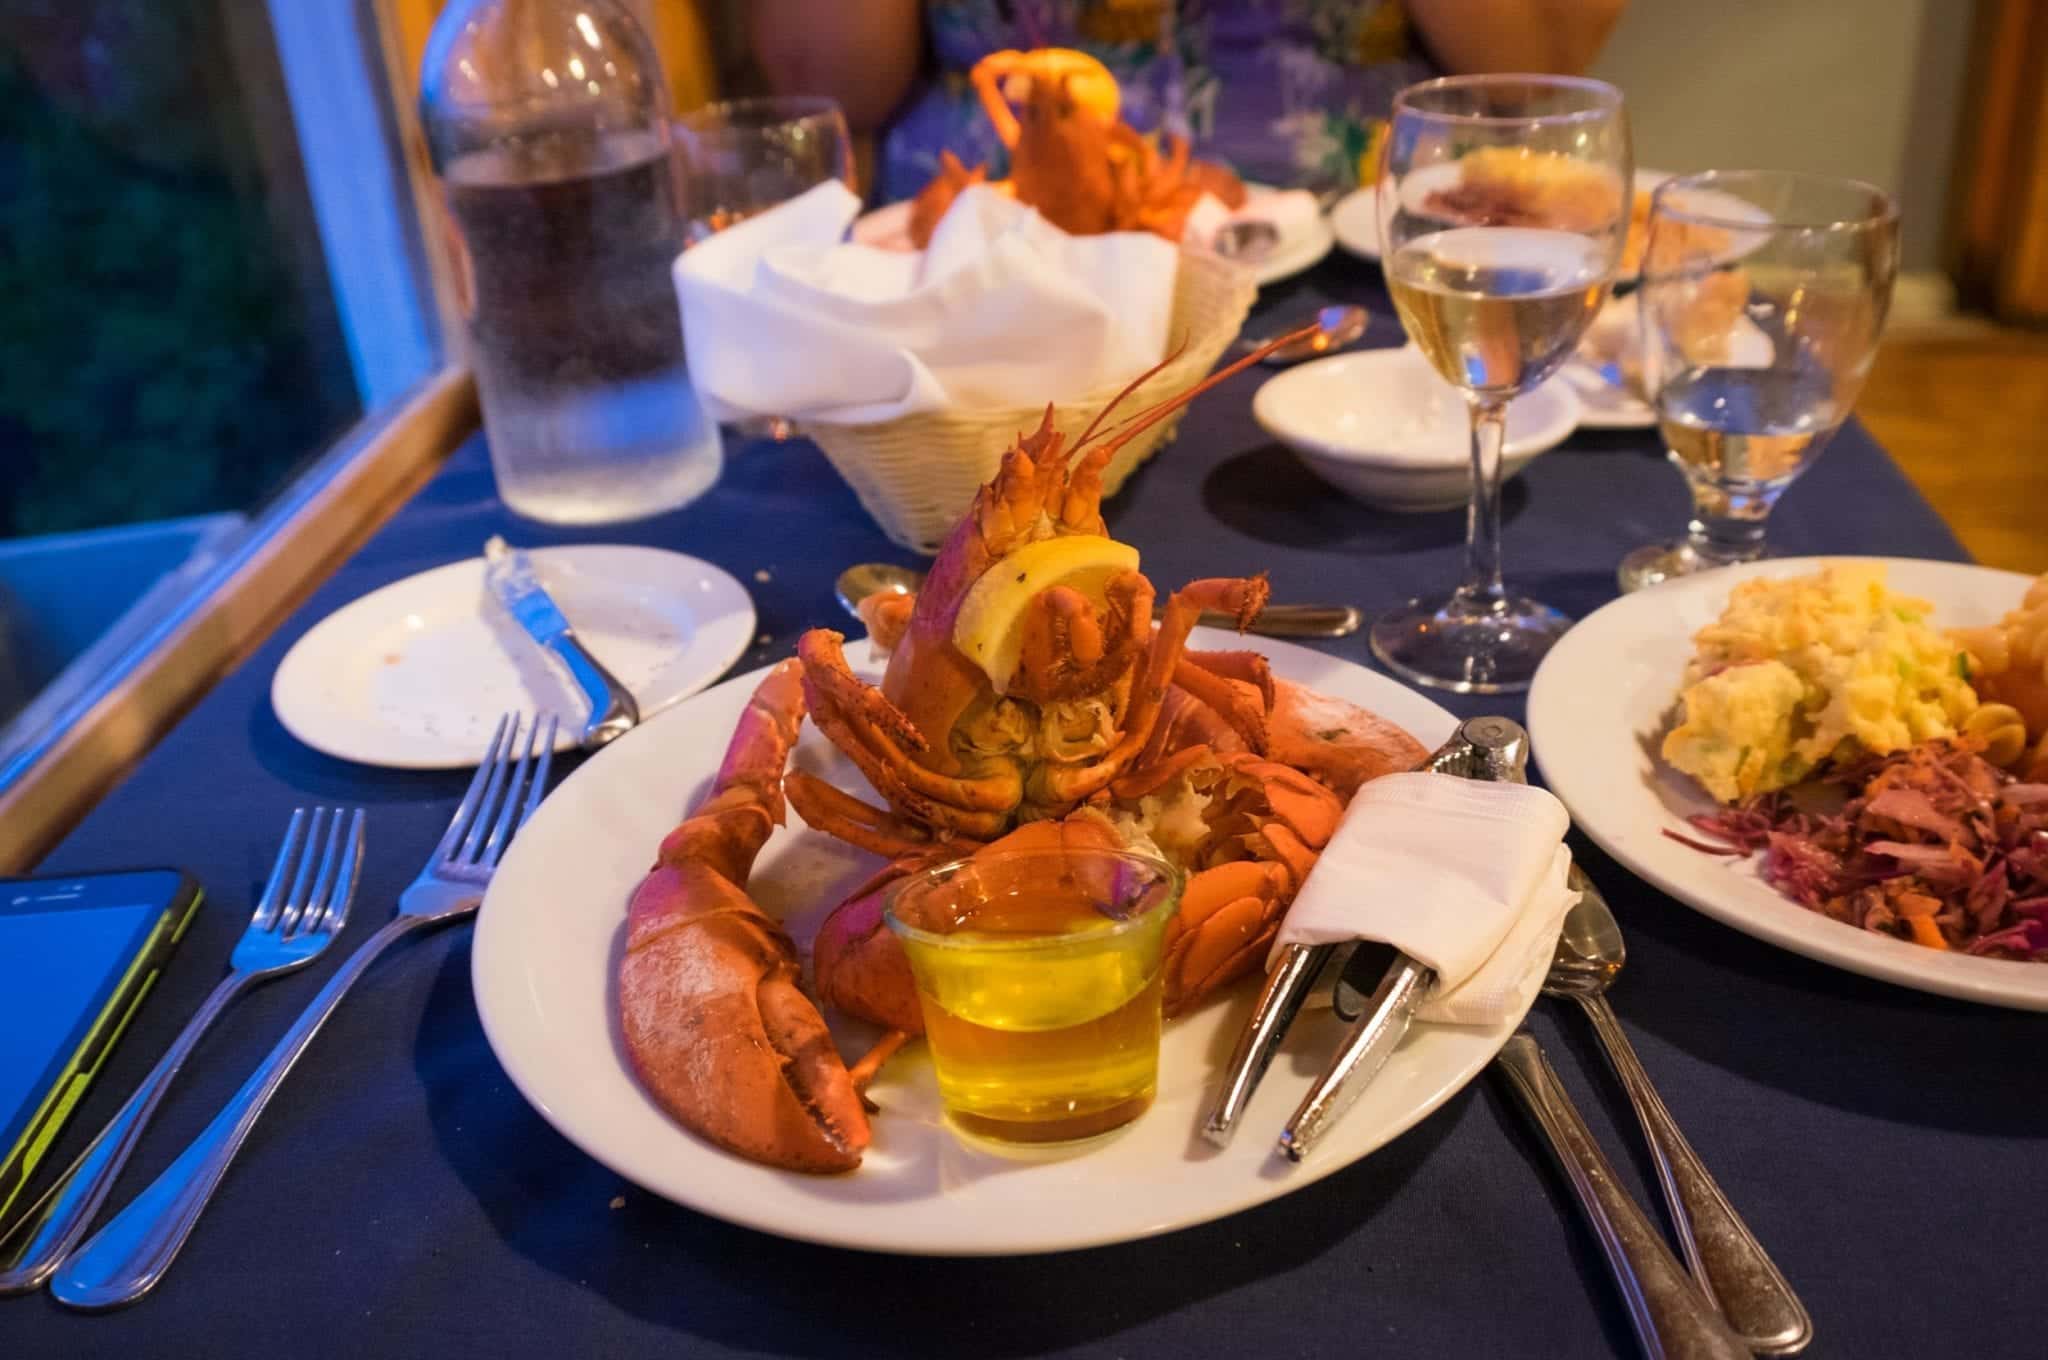 A lobster placed on a plate head up, looking like he's going to eat YOU.